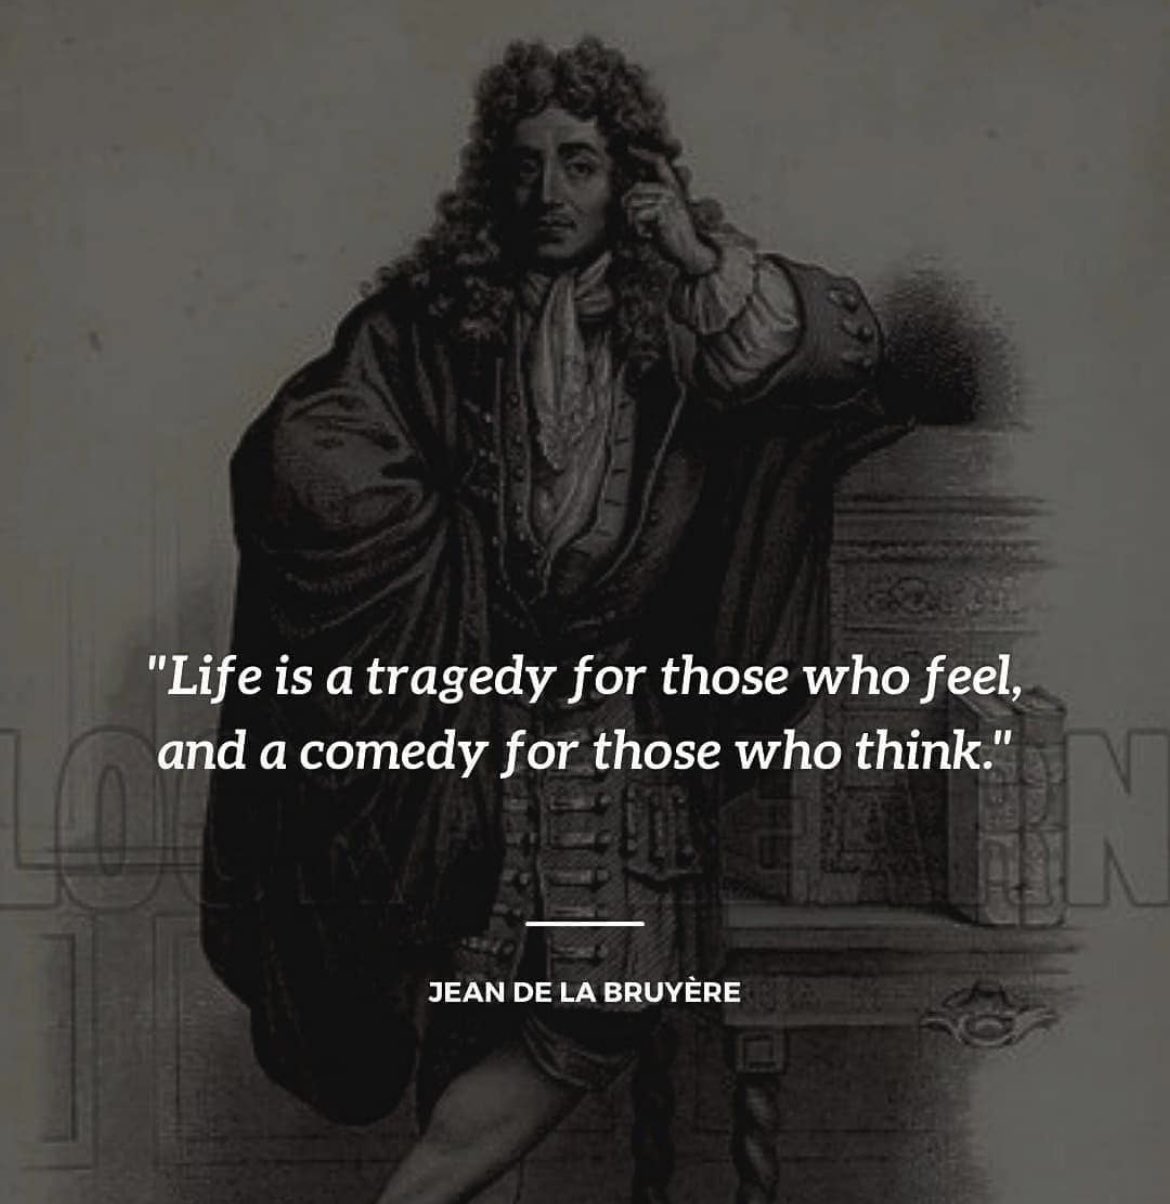 Life is a tragedy for those who feel, and a comedy for those who think.